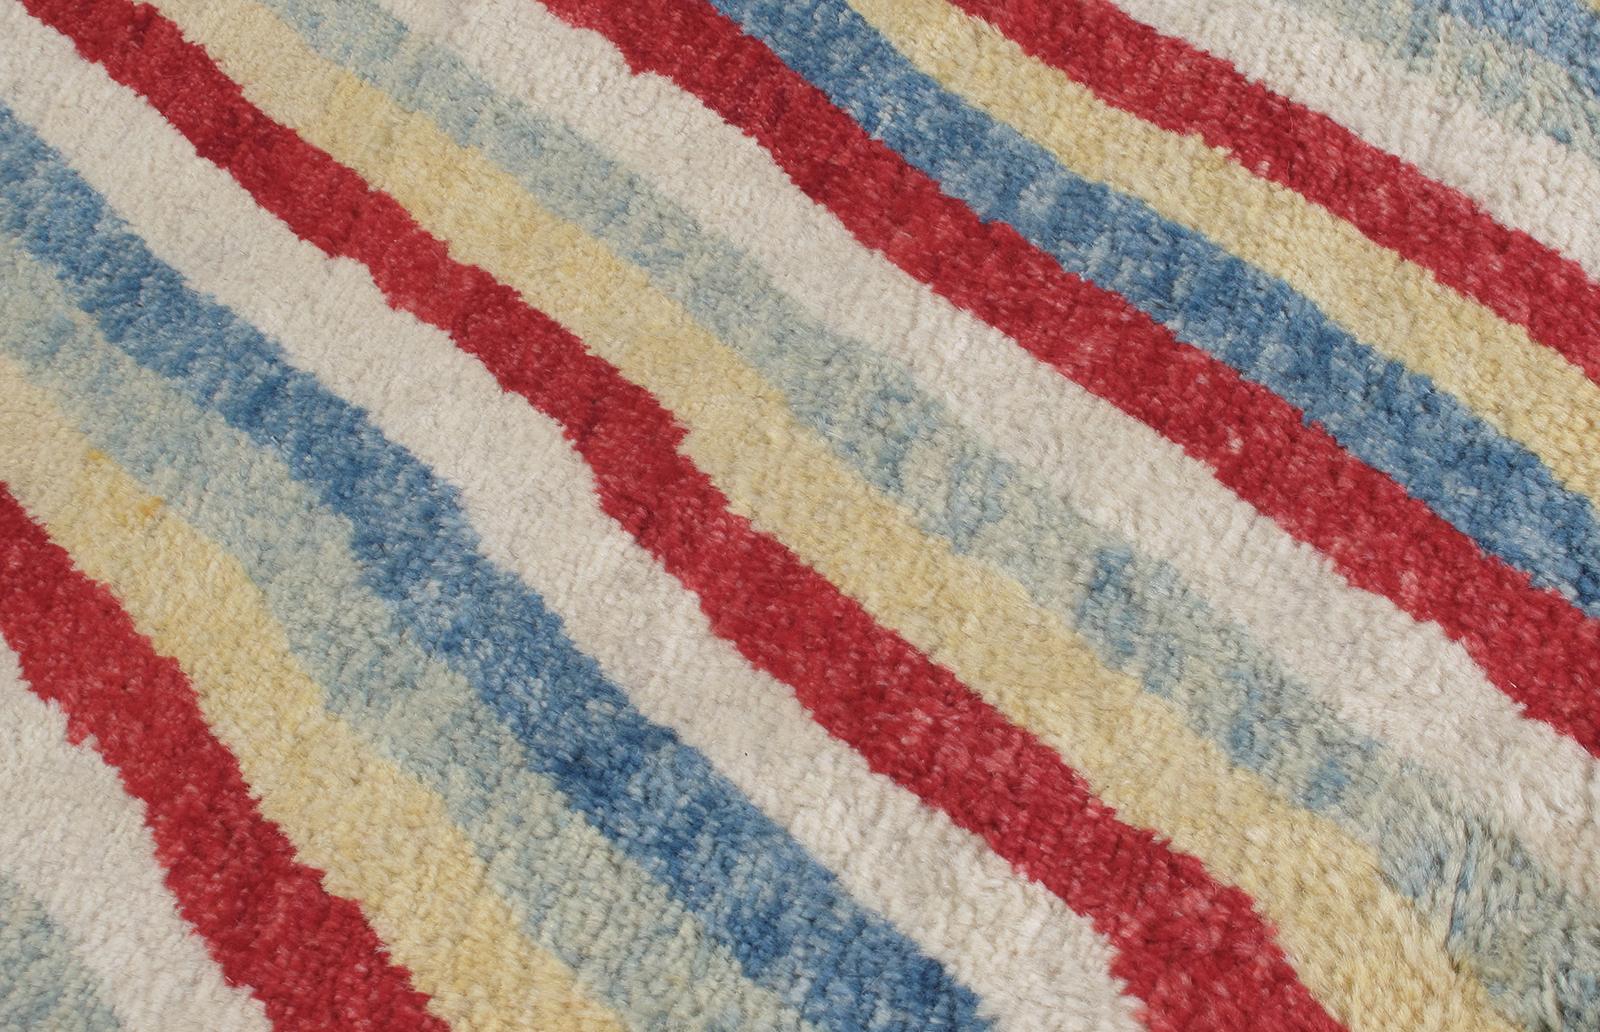 This tribal rug is made with 100% handspun Persian wool. It features a linear, diagonal design of bold colors. It is inspired by the vintage midcentury rugs that are native to the Shiraz region in Iran. Nasiri continues their rich tradition of rug